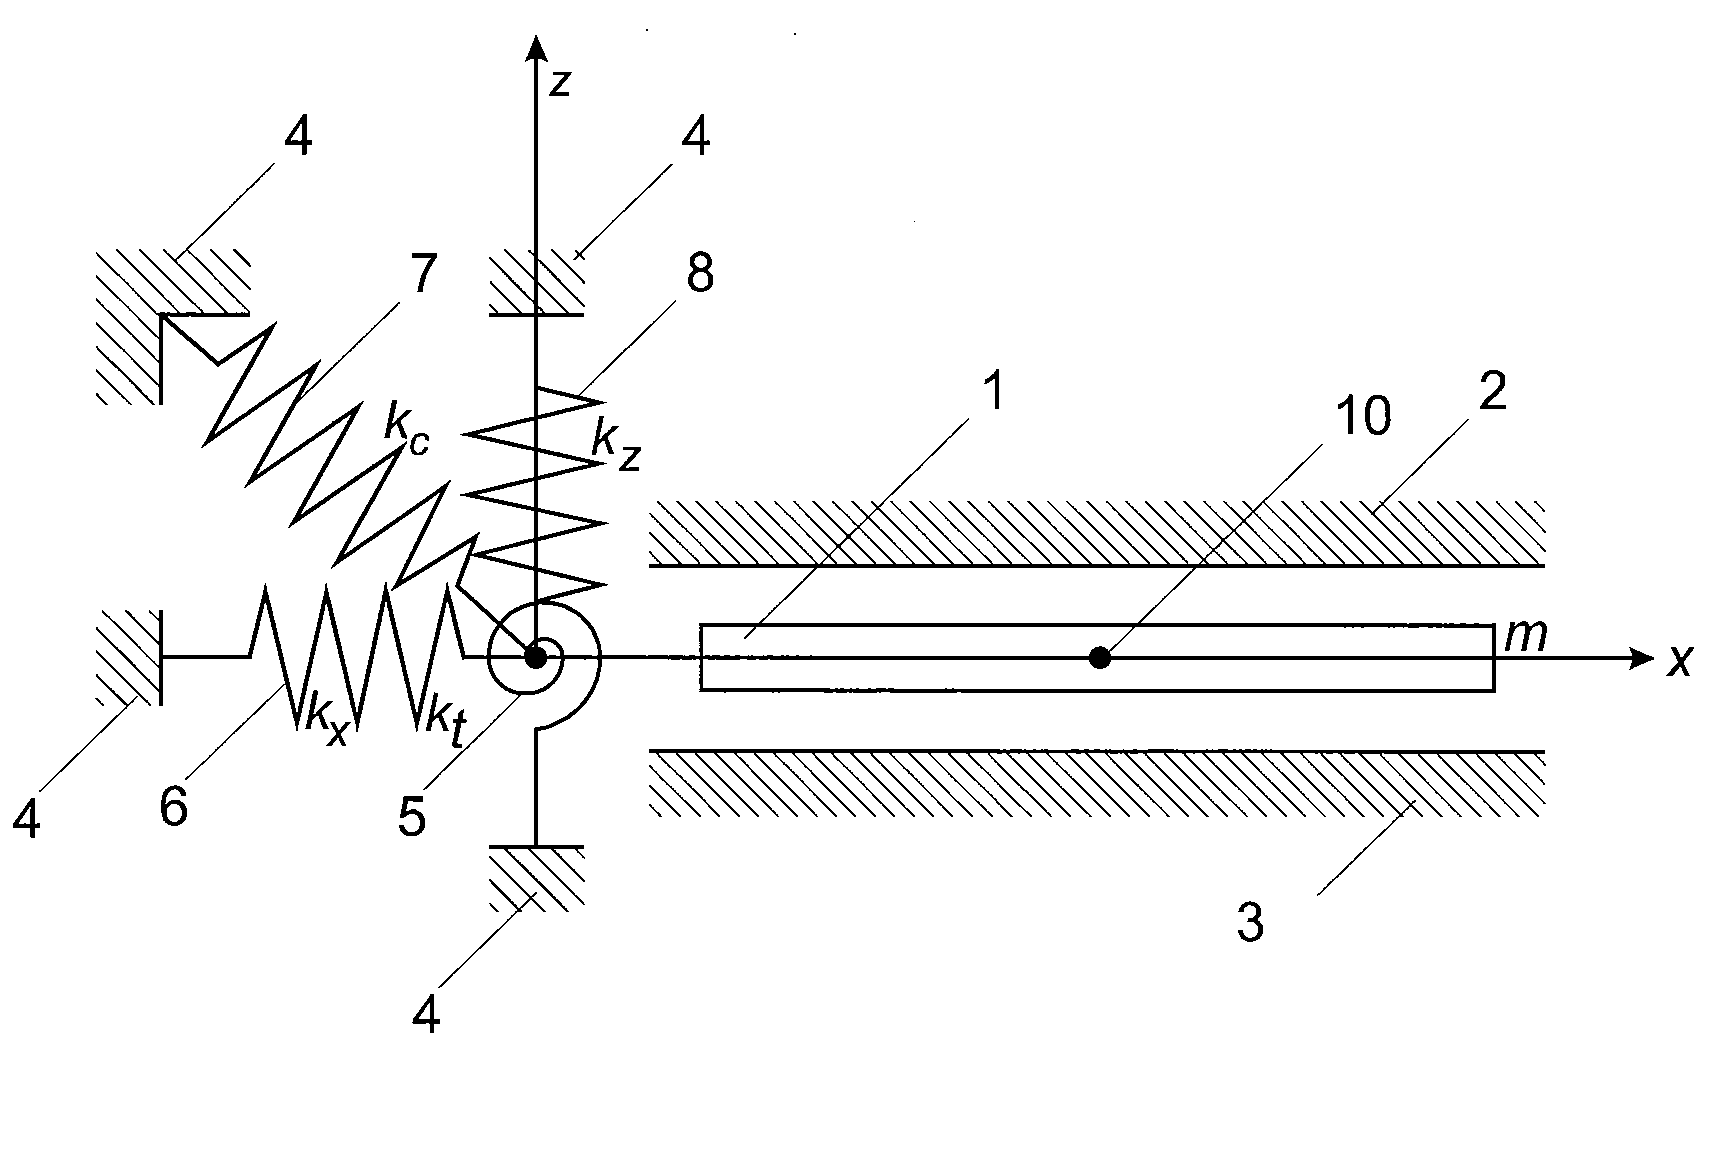 Vibrating gyroscope with quadrature signals reduction